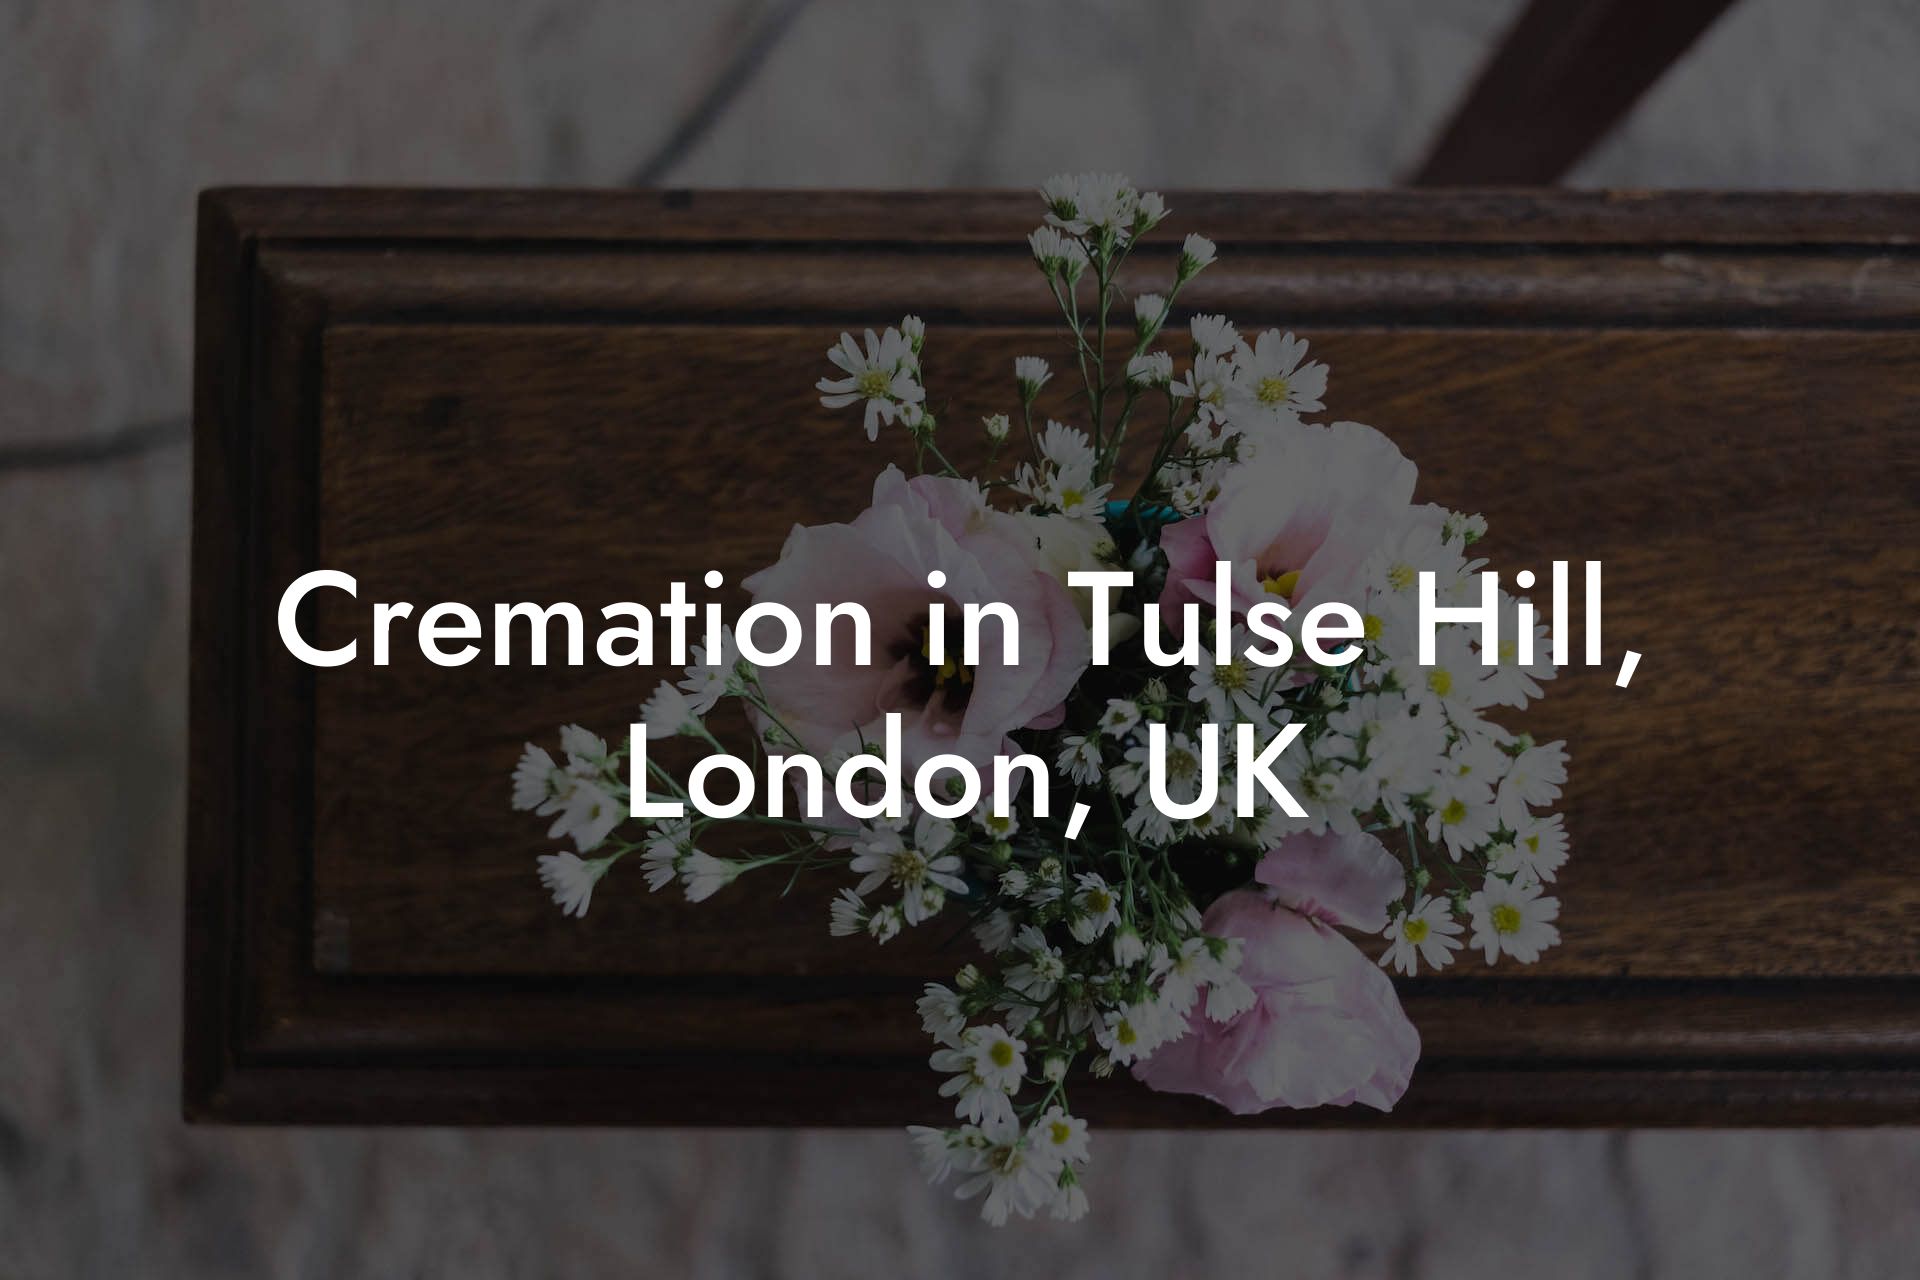 Cremation in Tulse Hill, London, UK